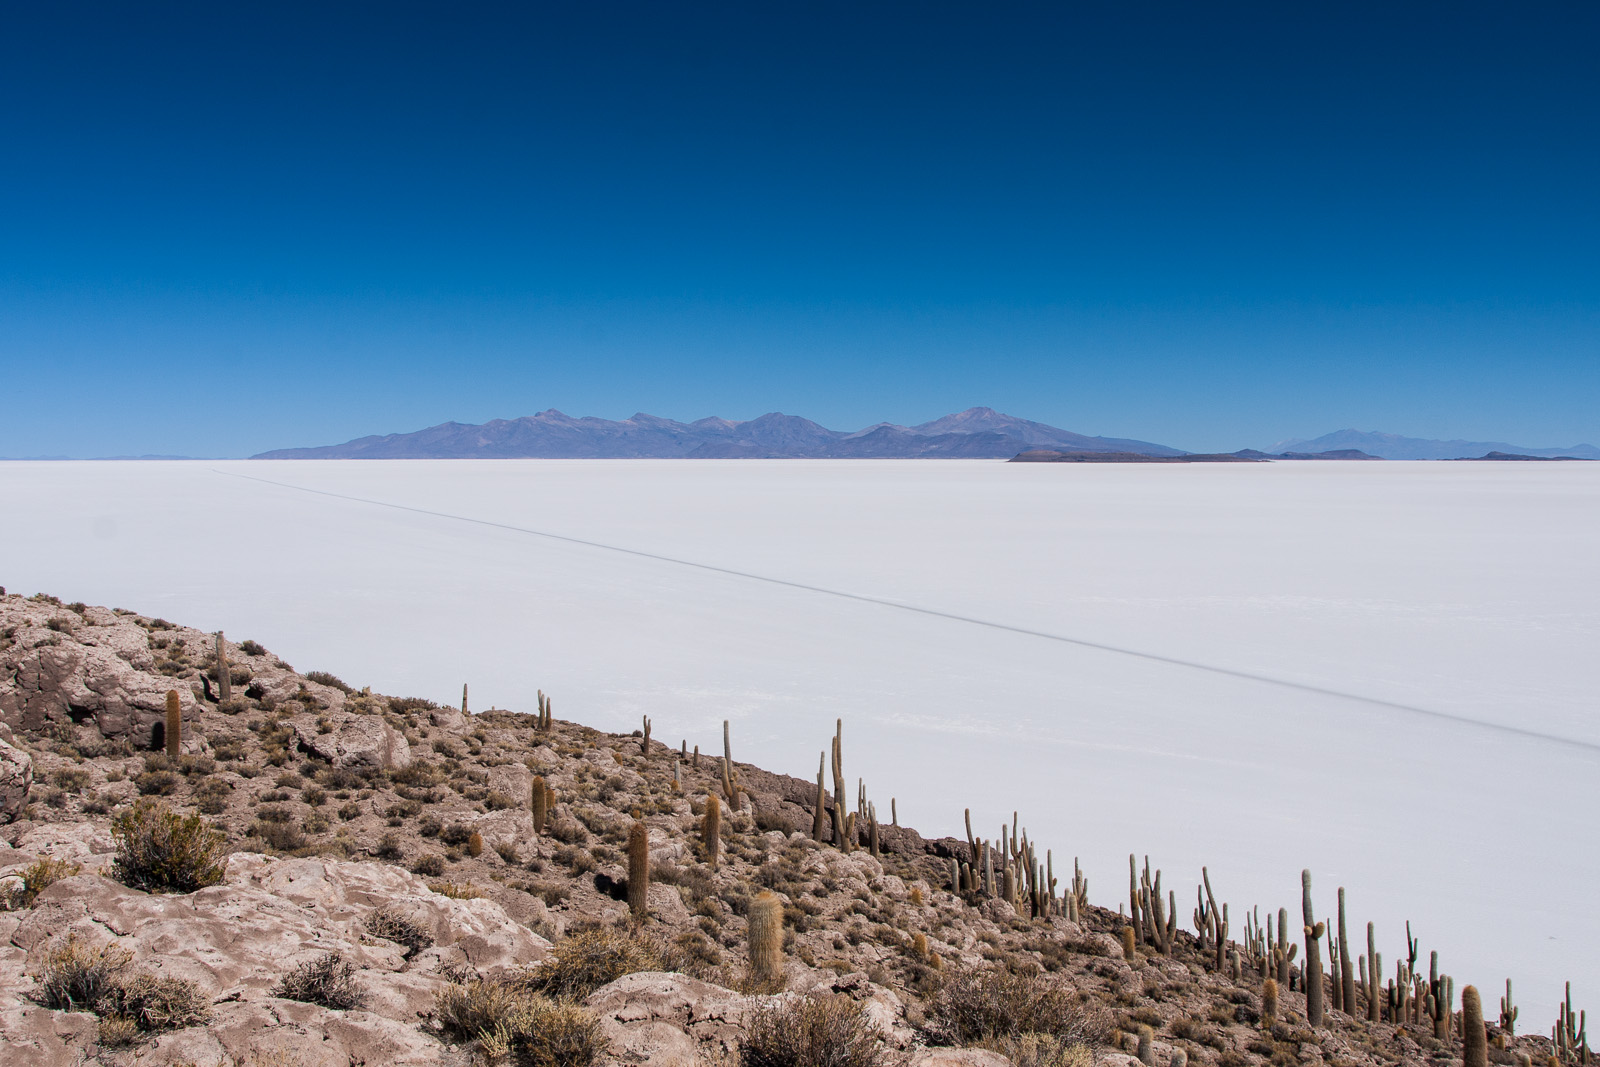 Whilst the salt may be unusually flat, this is still high up in the Andes. Volcanoes and other mountains can soar up to 2,000 metres higher. Here I’m a mere 100 metres higher.